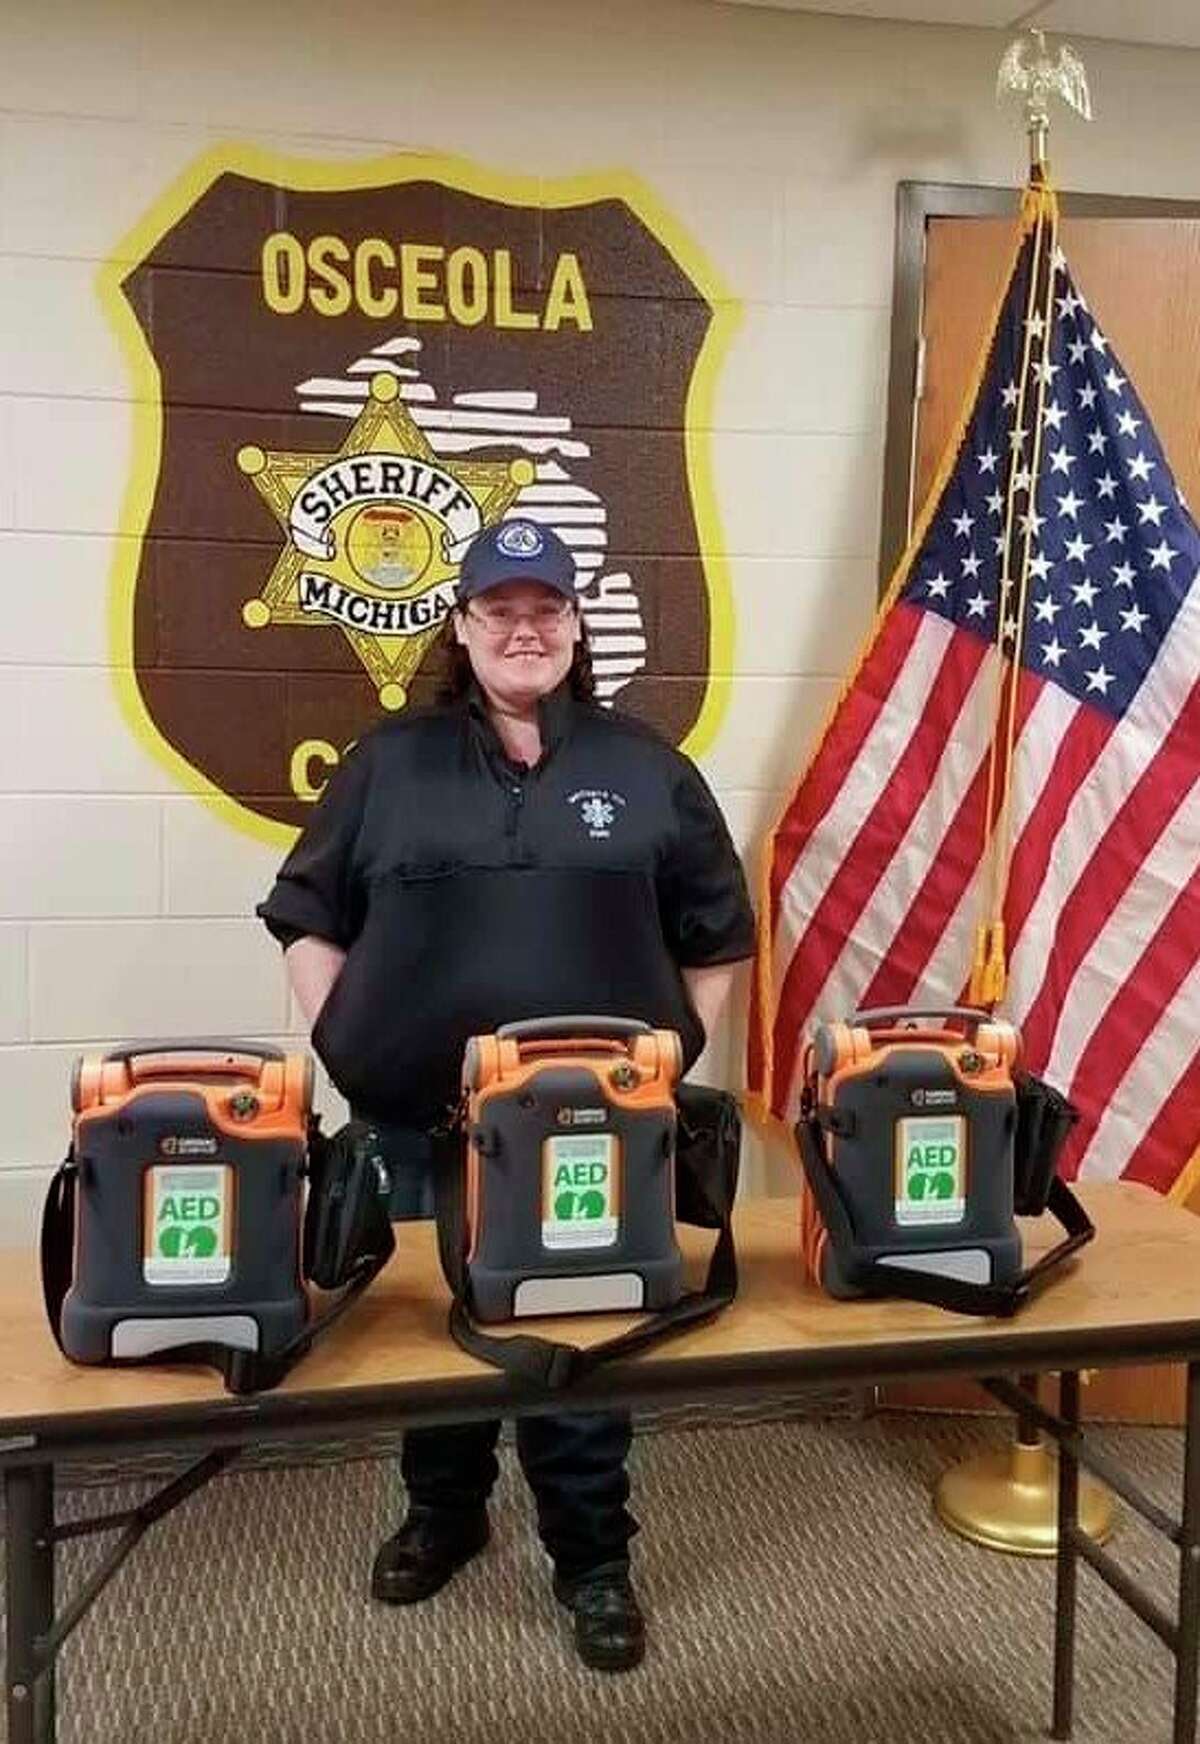 Jenny Edstrom, who works for Mecosta County EMS and is the wife of an Osceola County deputy, was instrumental in procuring the AED's donated to local agencies in Mecosta, Osceola and Lake counties. (Photo courtesy of Osceola County Sheriff's department)